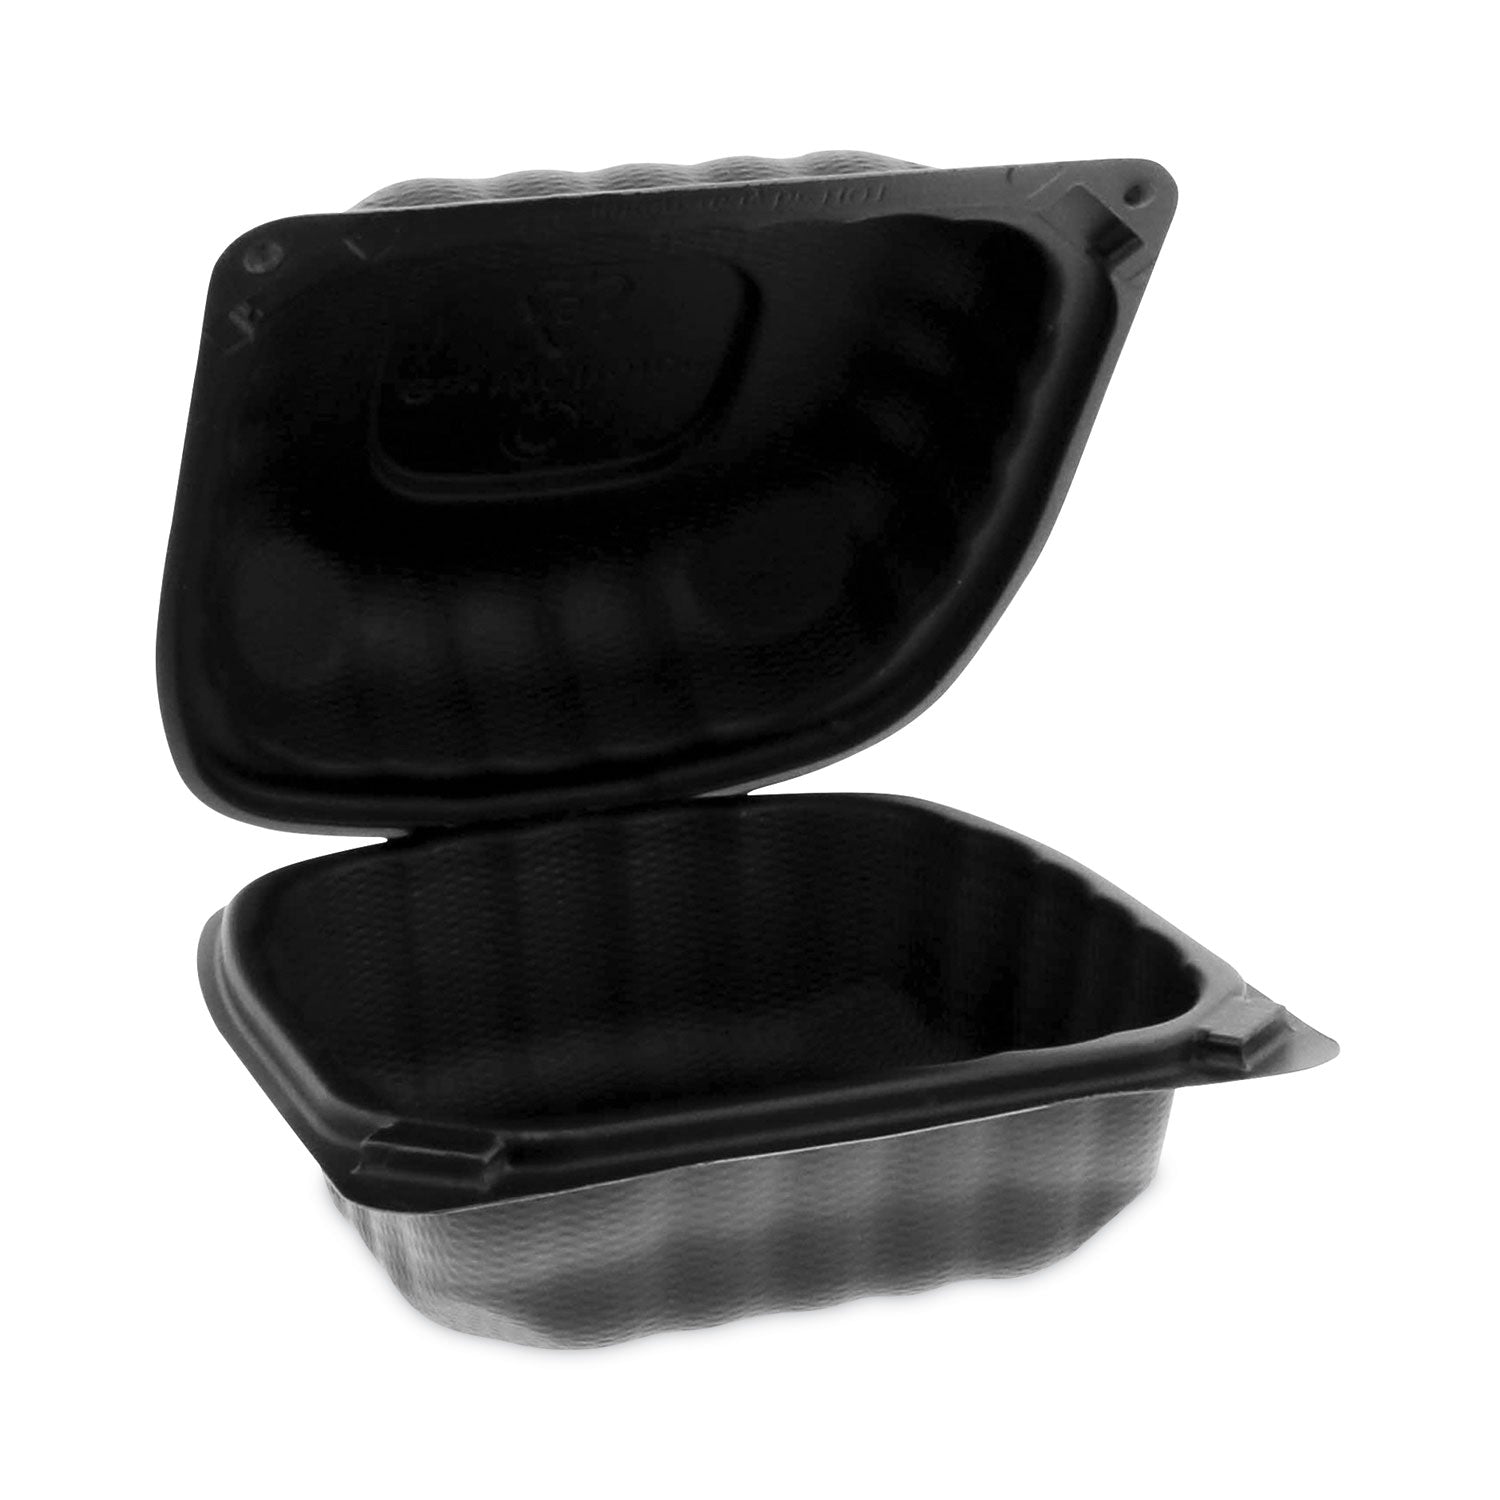 earthchoice-smartlock-microwavable-mfpp-hinged-lid-container-575-x-595-x-31-black-plastic-400-carton_pctycnb06000000 - 1